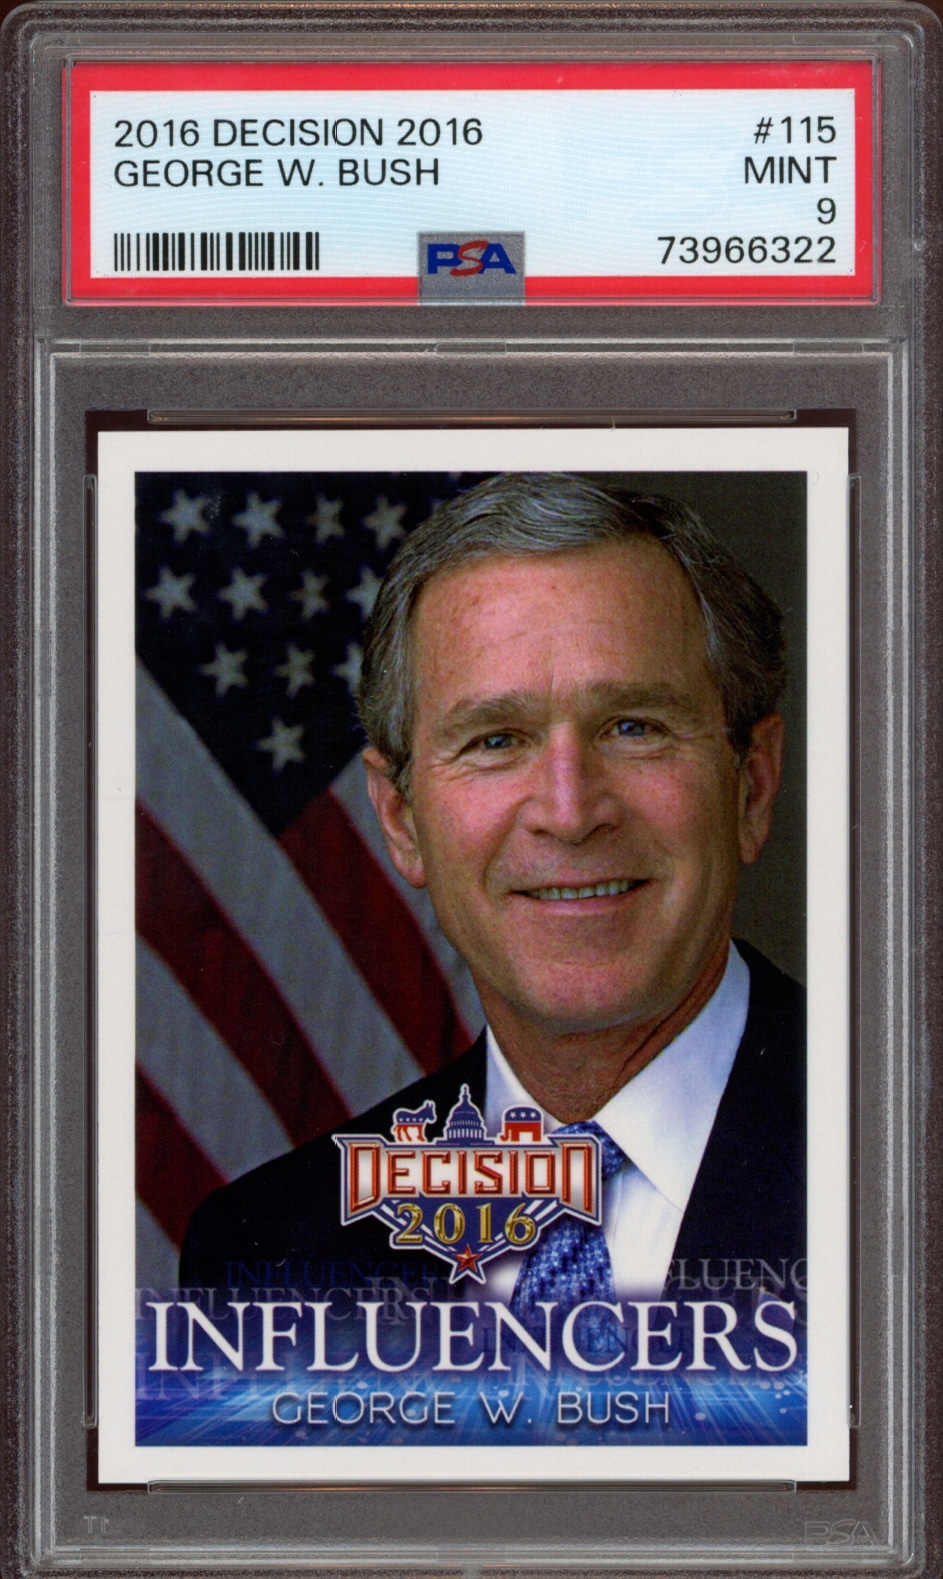 2016 Decision collectors card featuring George W. Bush, graded mint 9 by PSA.